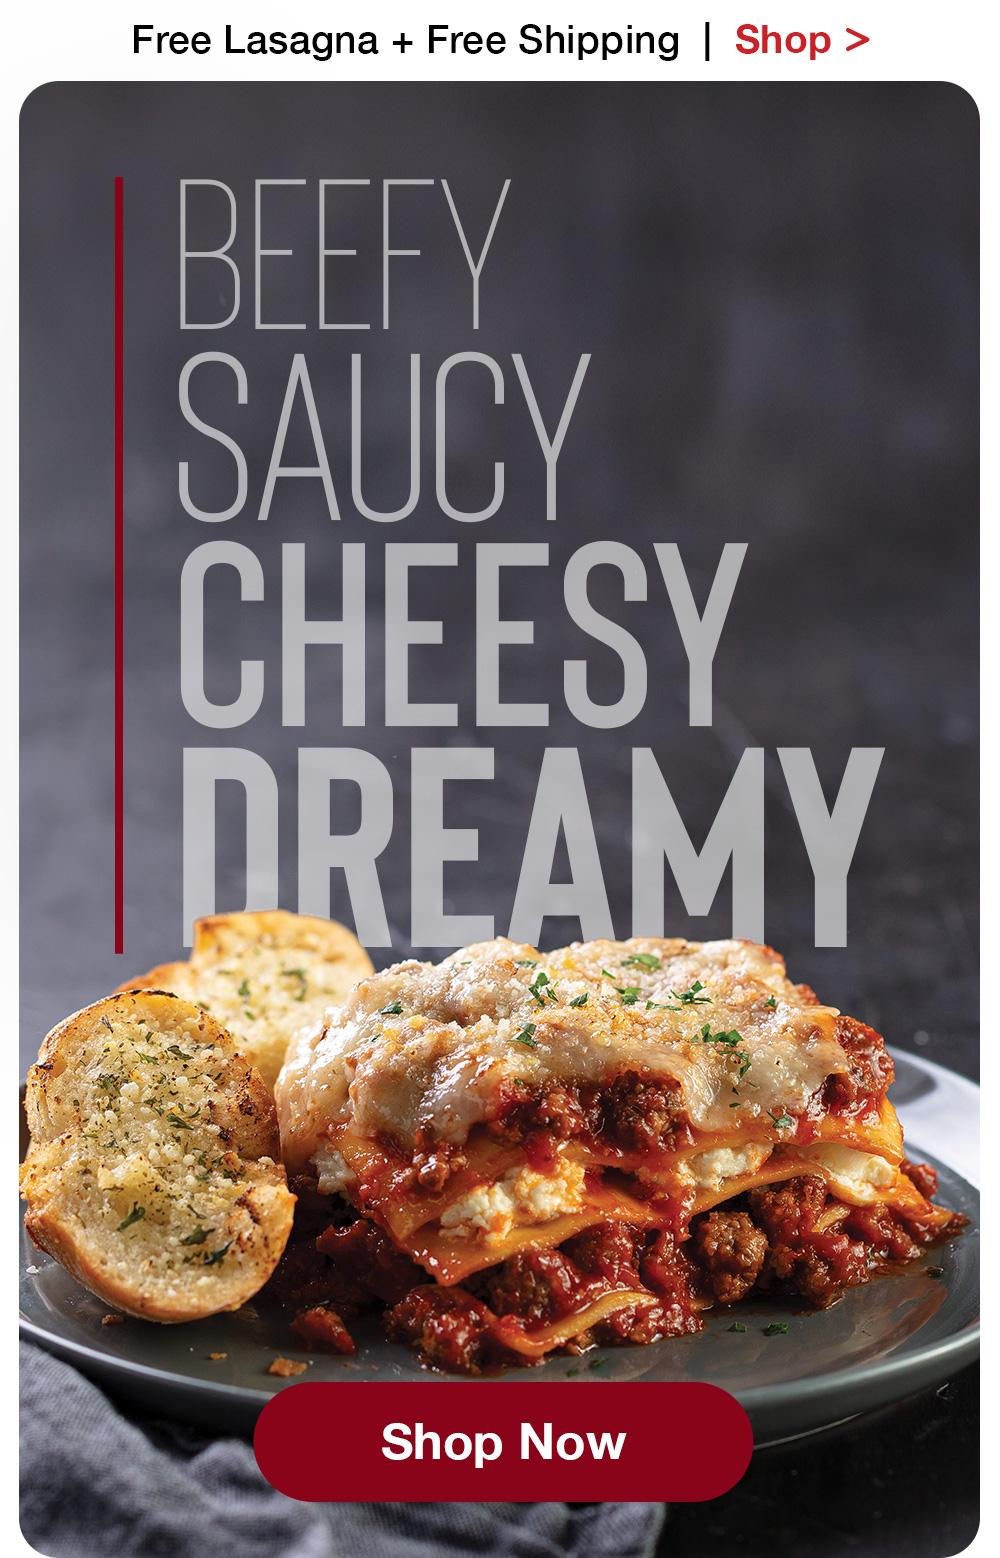 Free Lasagna + Free Shipping | Shop >  BEEFY SAUCY CHEESY DREAMY || Shop Now